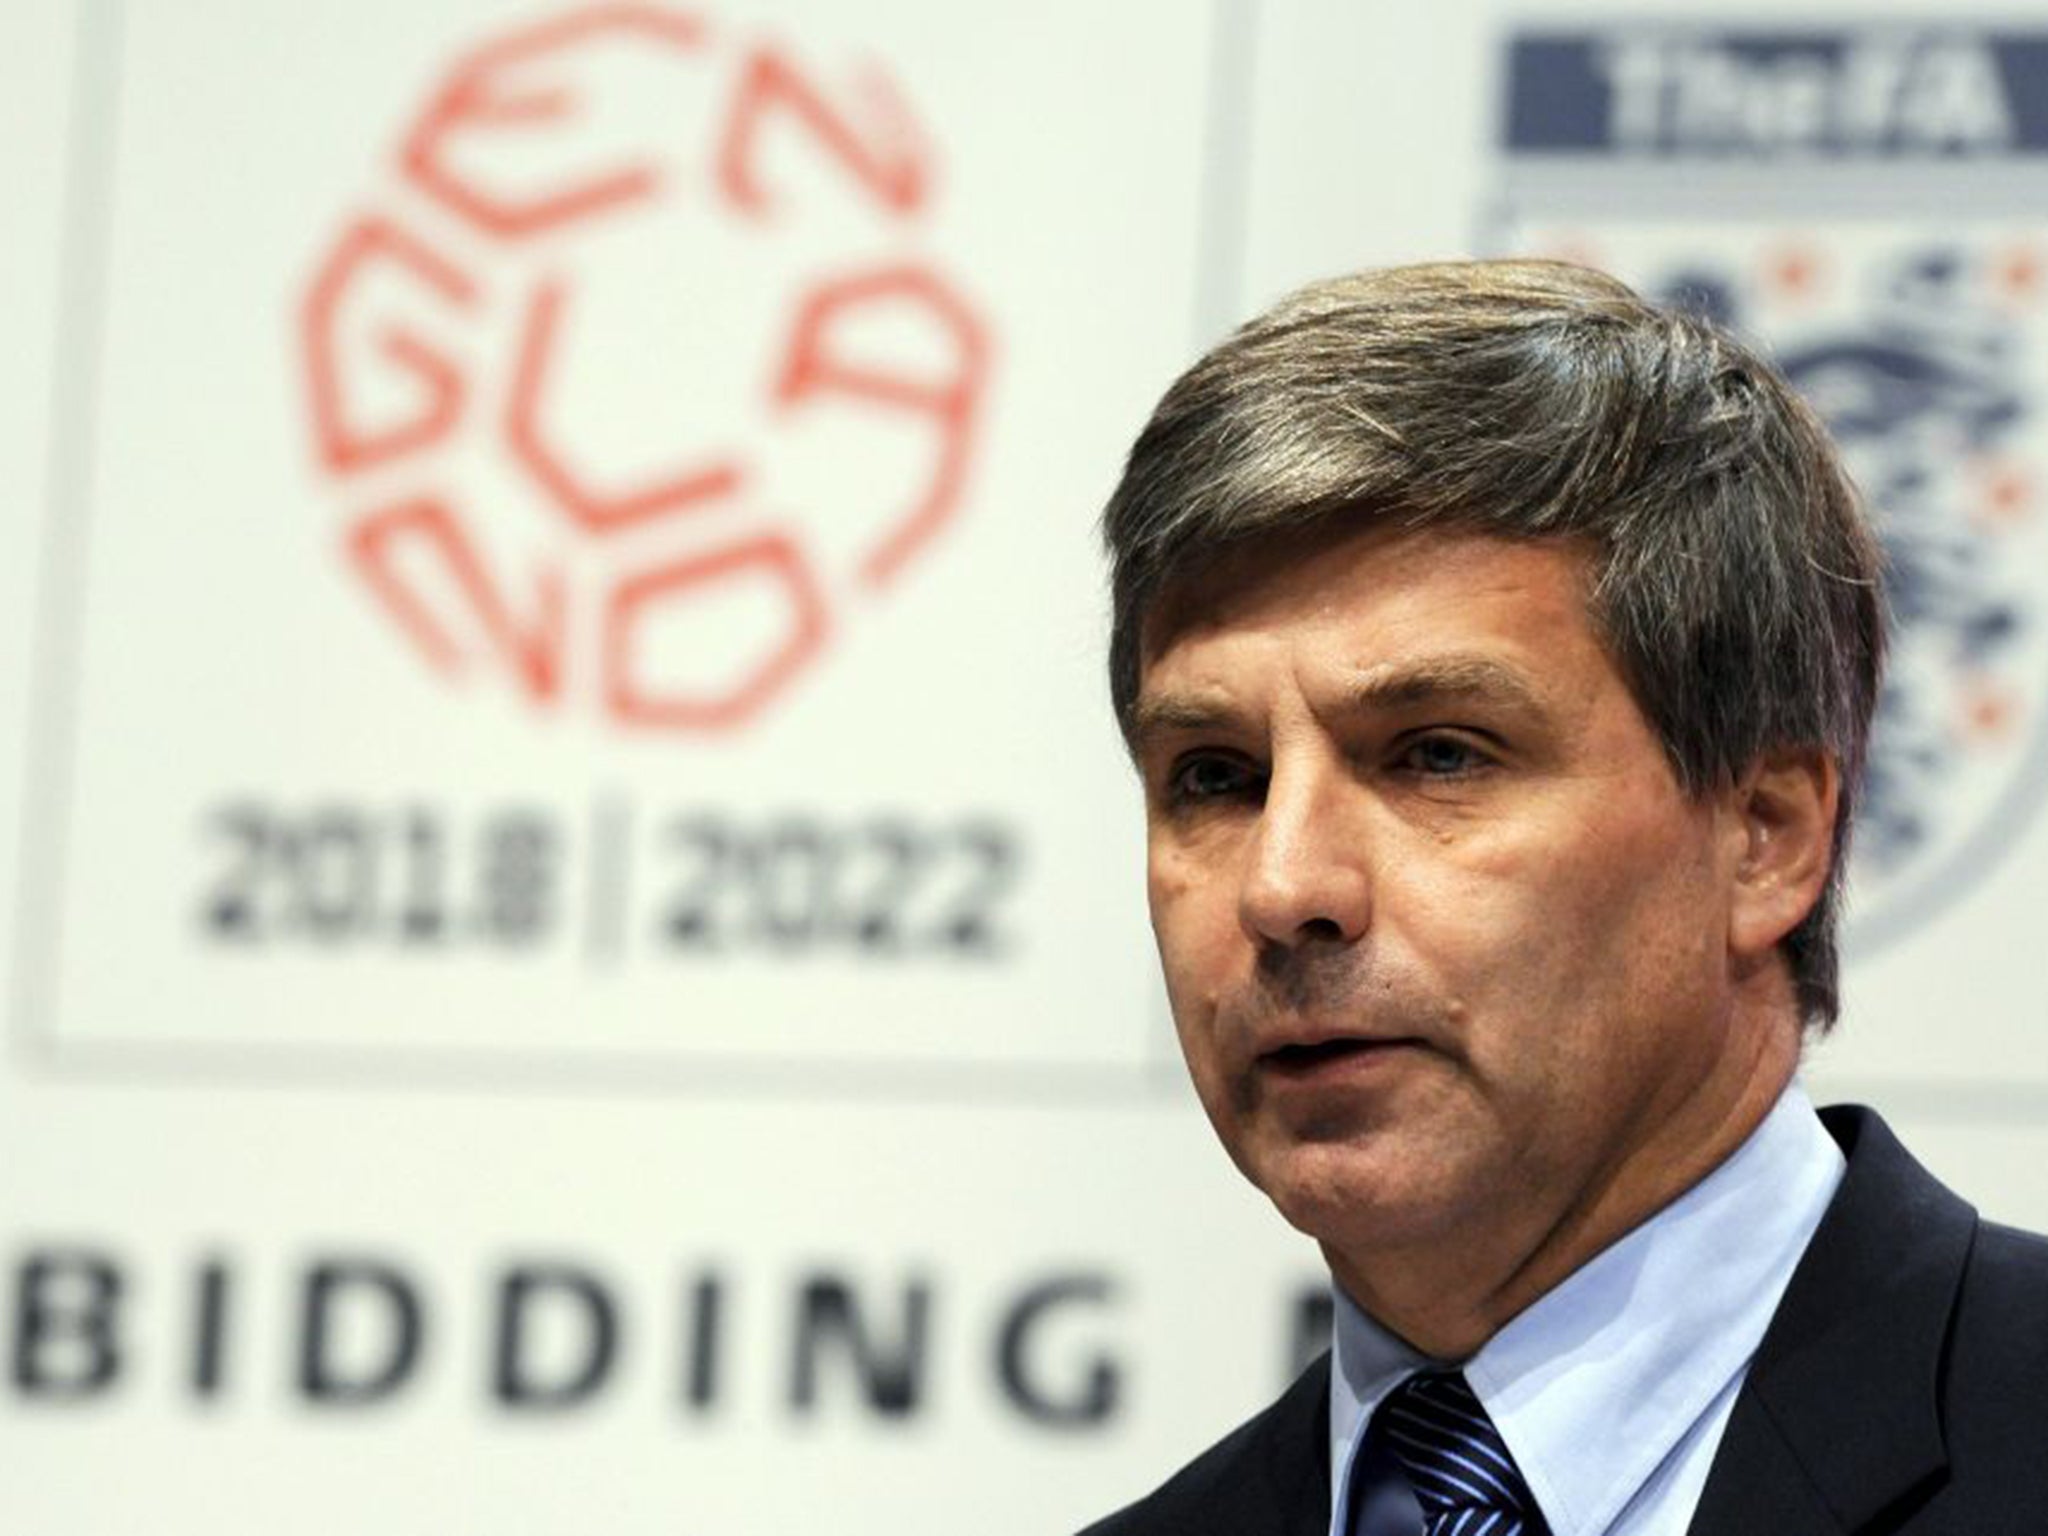 Harold Mayne-Nicholls was head of the inspection committee for the 2018 and 2022 World Cup bids